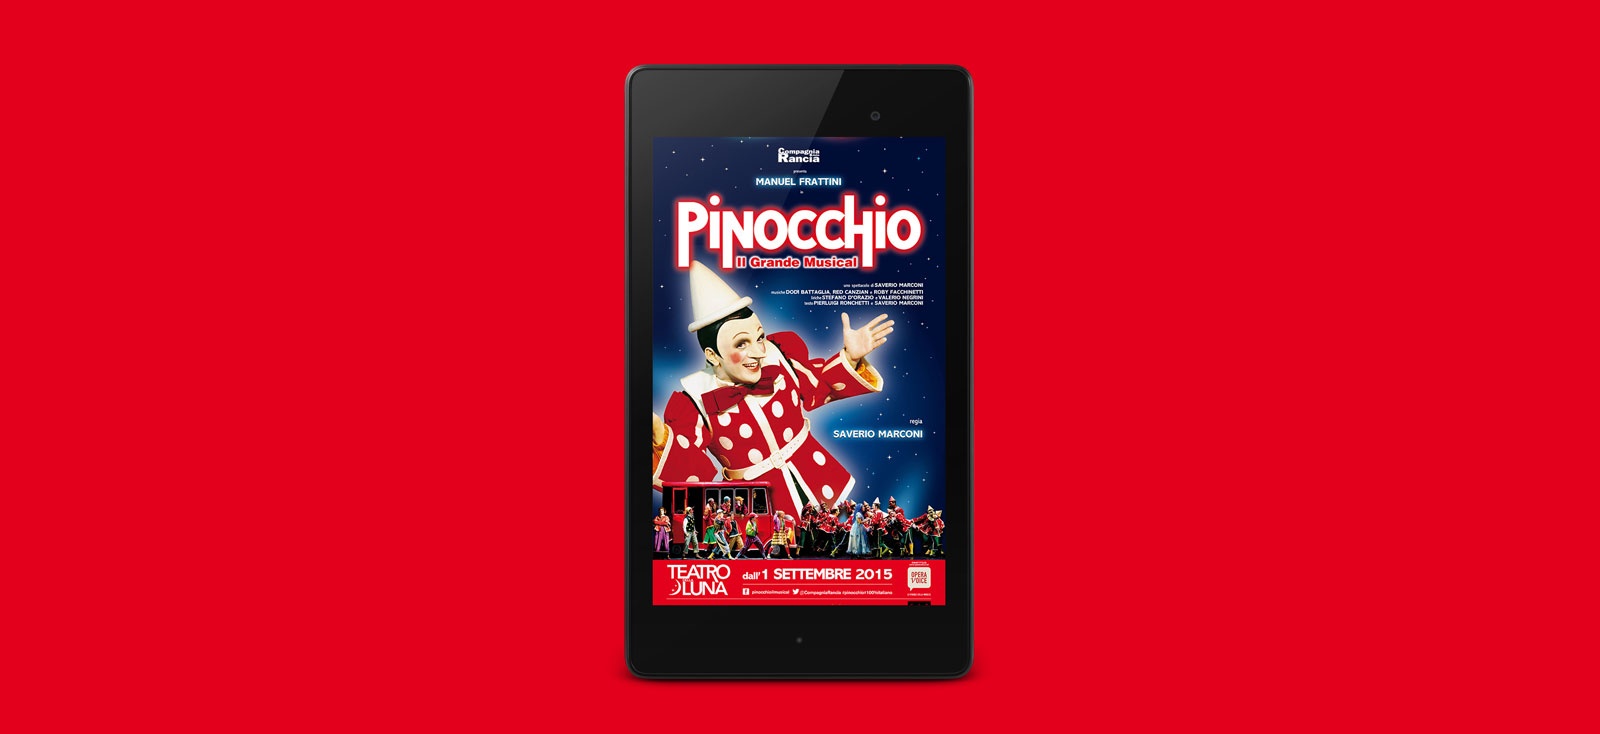 Opera Voice for Pinocchio musical